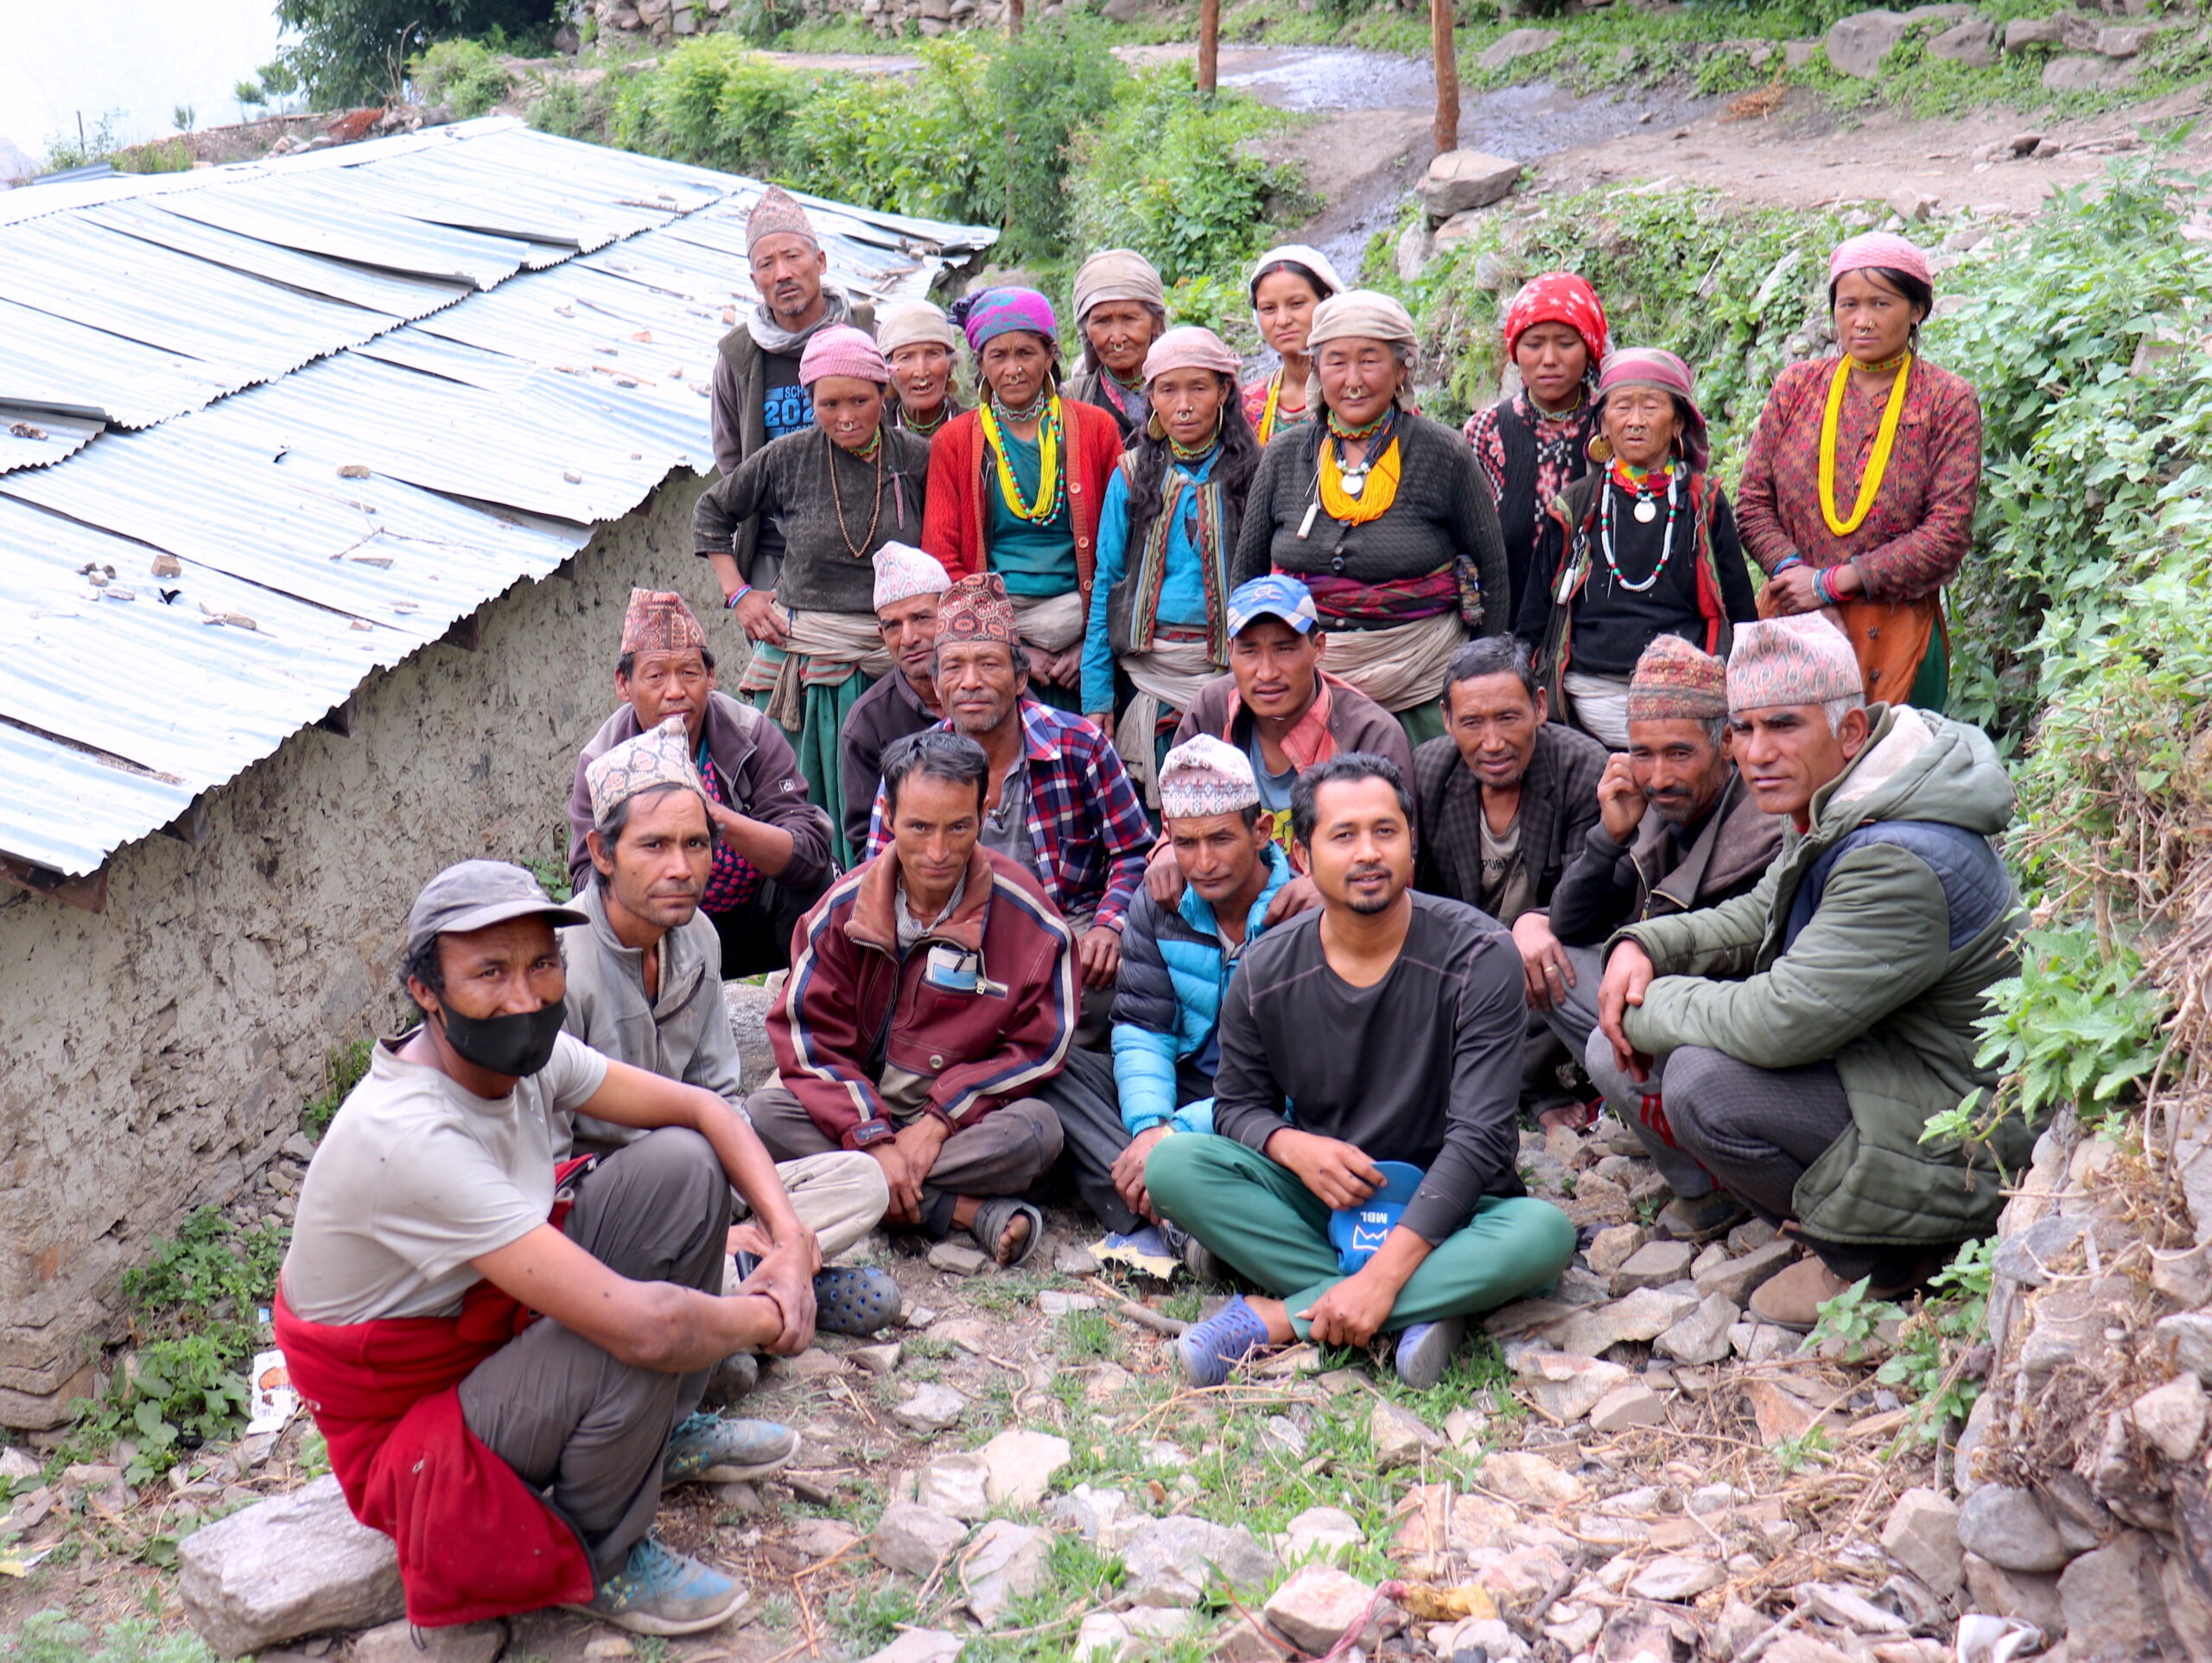 Himalayan plants for people: Sustainable trade for biodiversity and development